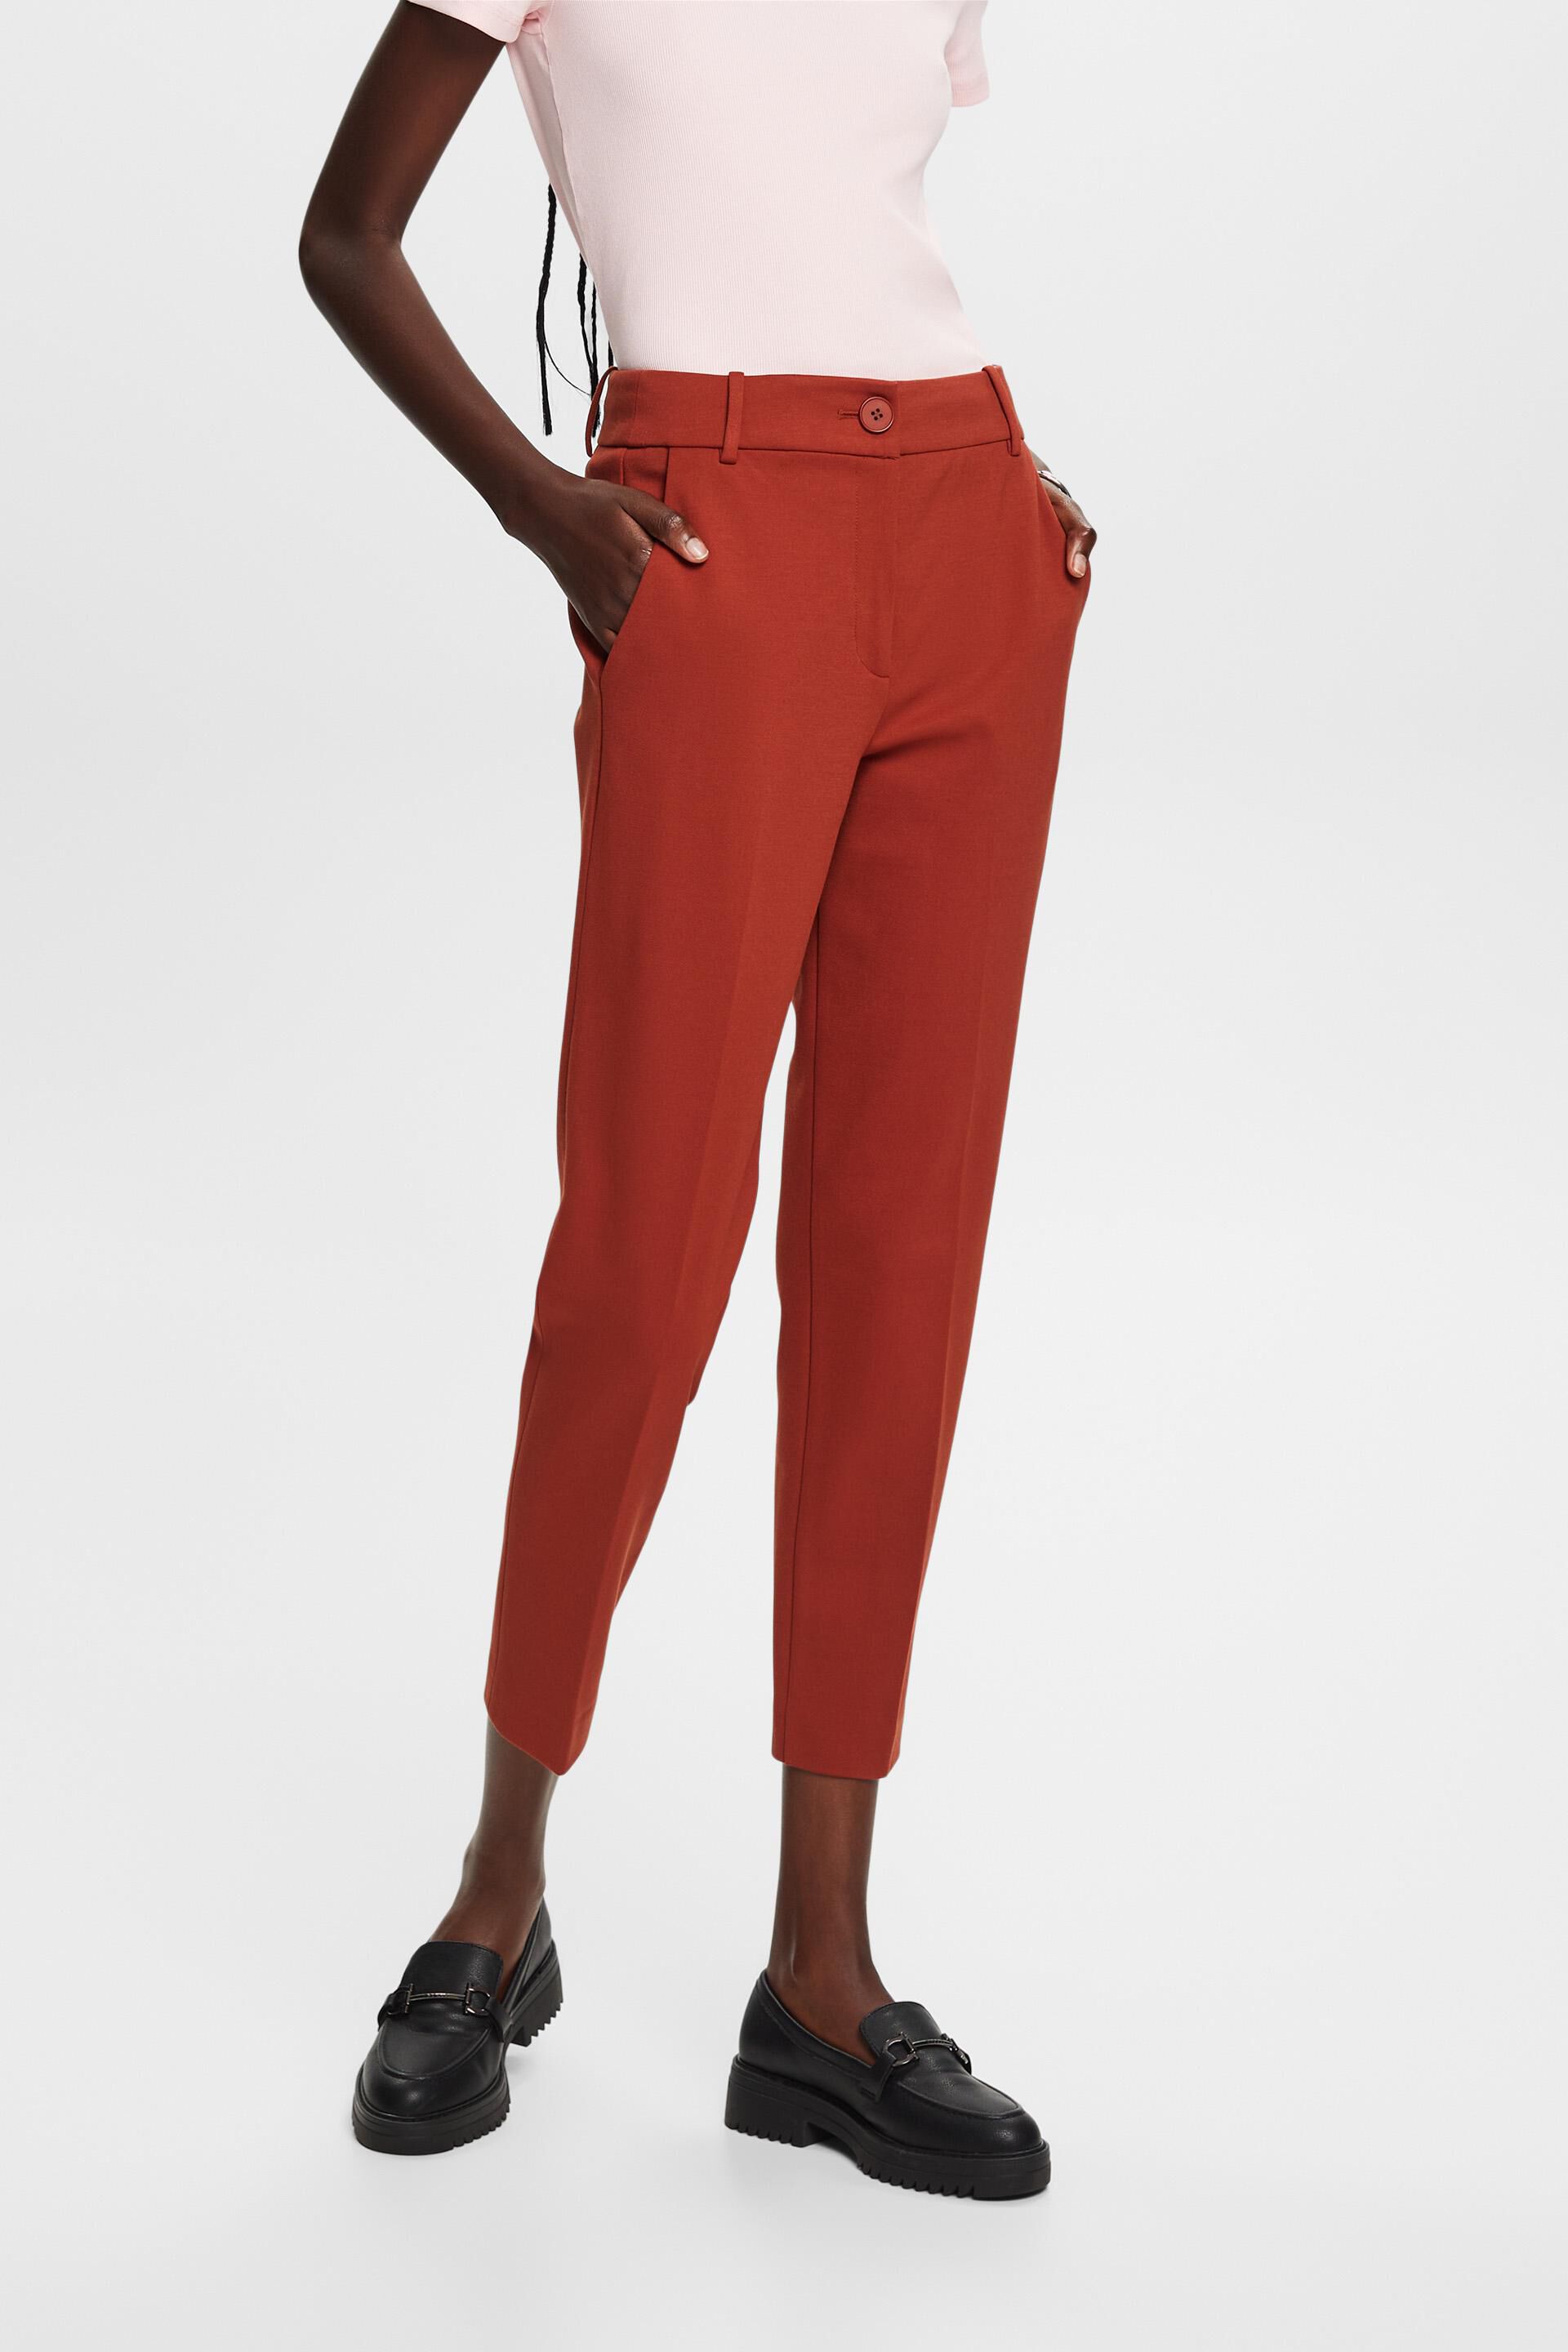 Esprit jersey Punto trousers cropped